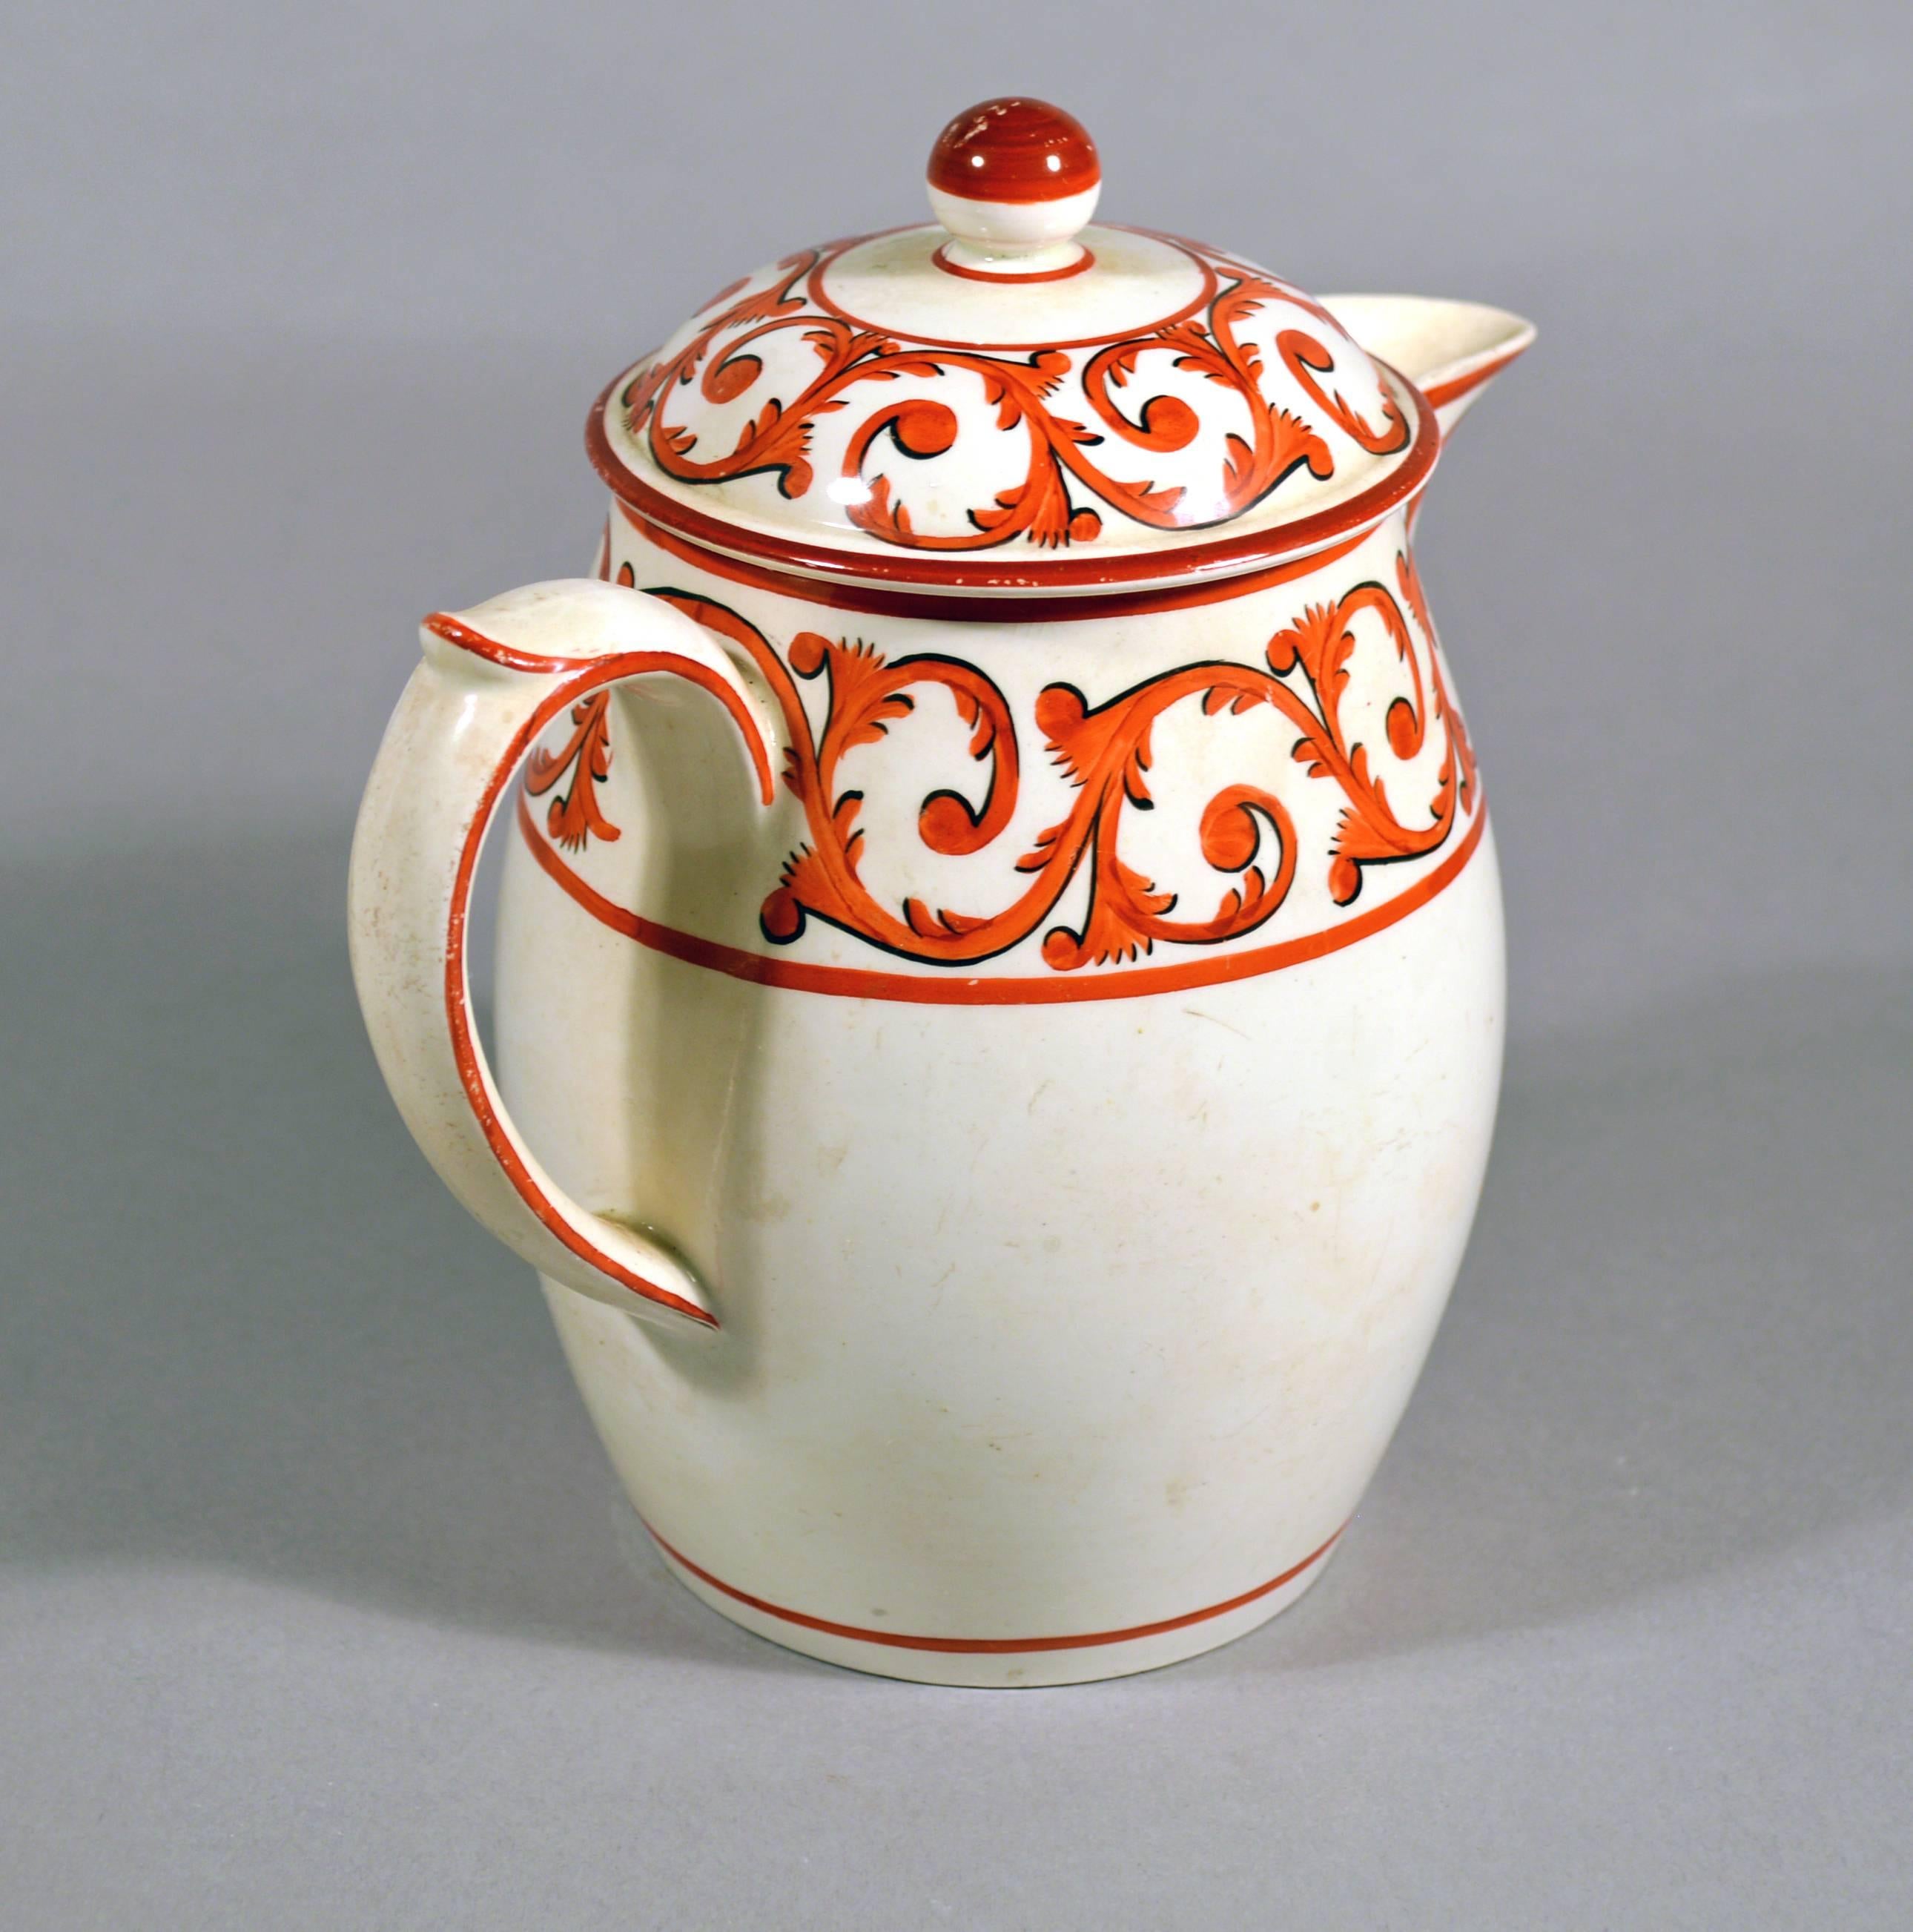 Regency English Pottery Covered Jug and Cover with Orange Foliate Scroll Designs For Sale